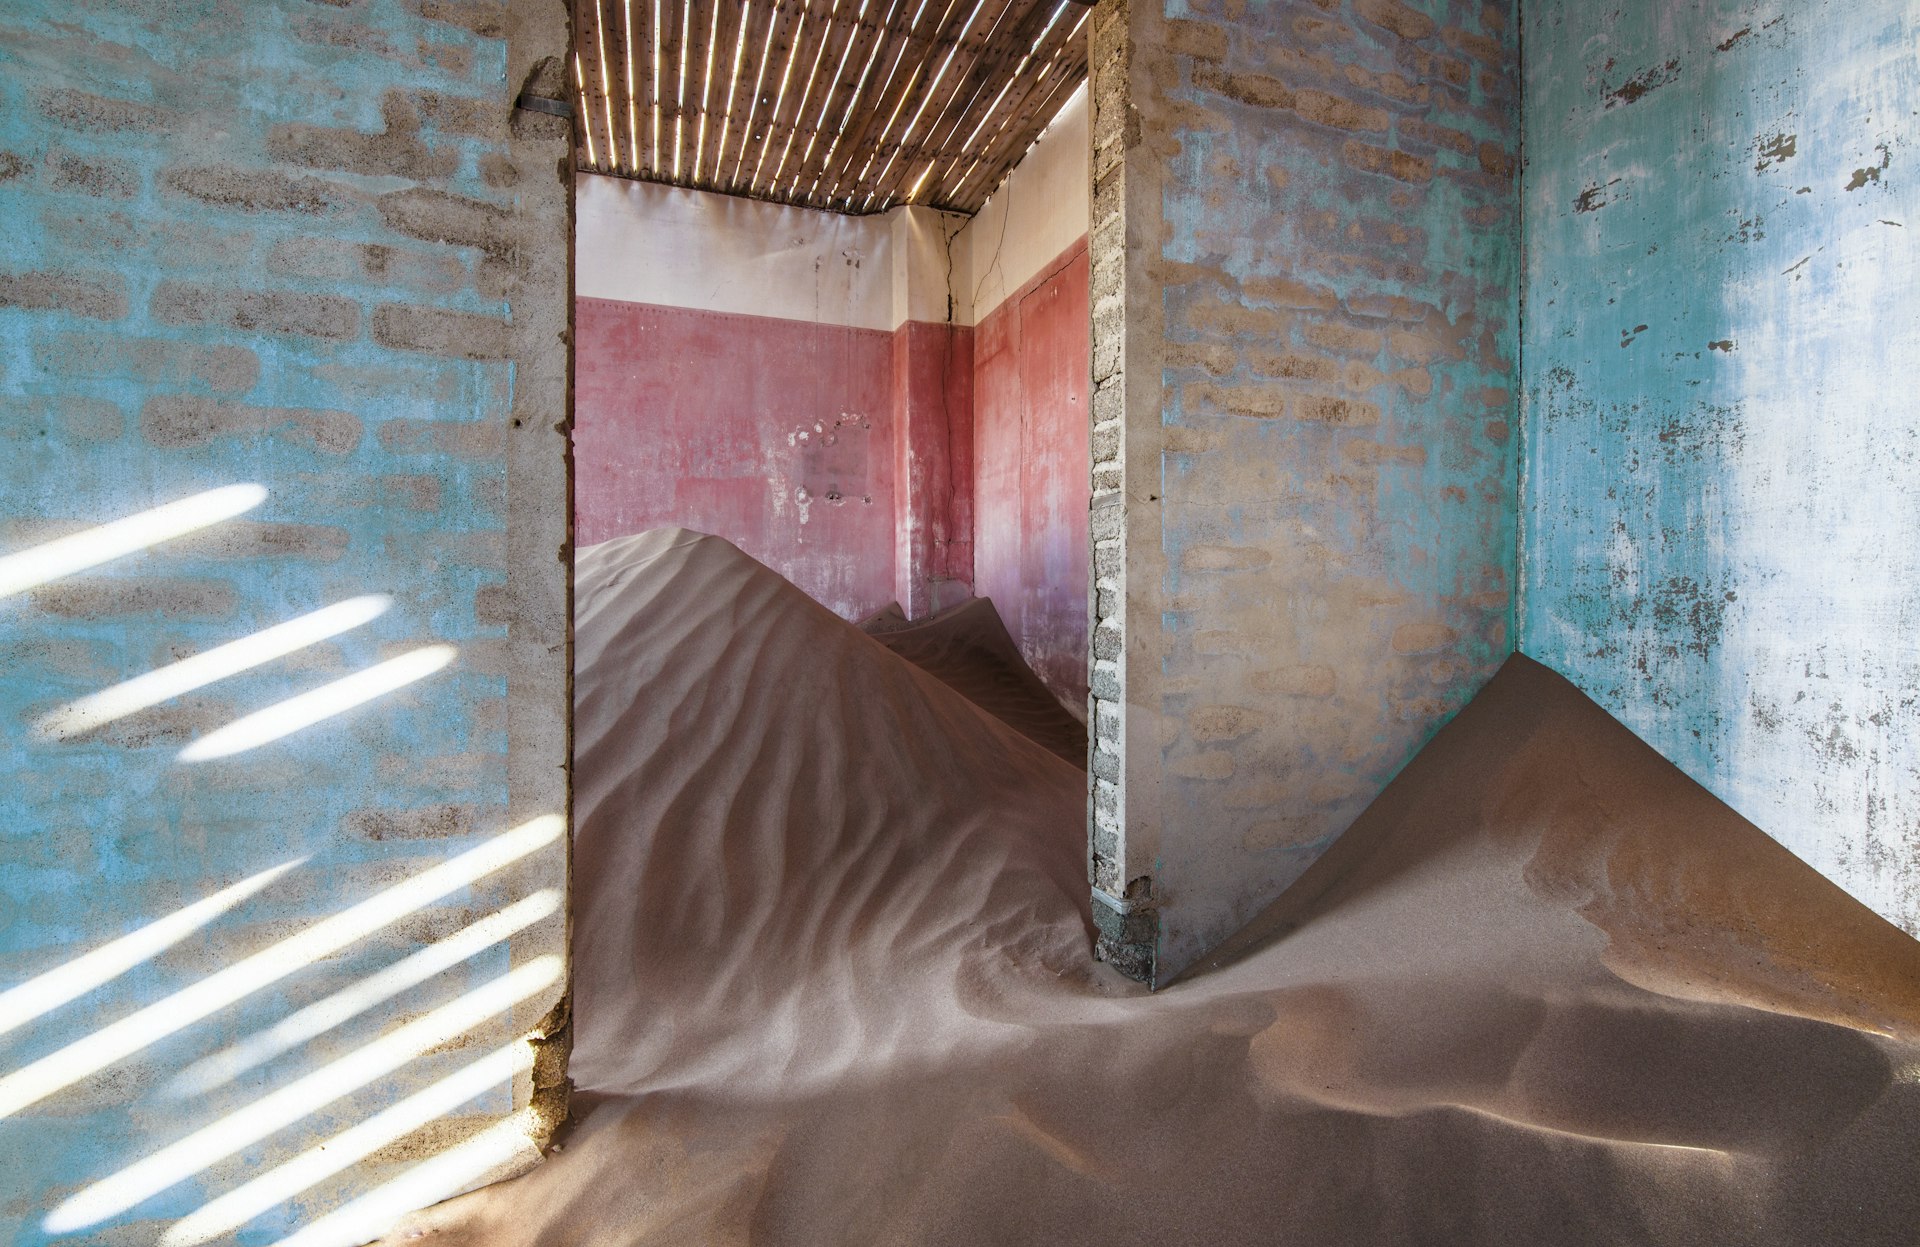 A sand dune has formed inside an abandoned building in a ghost town in Namibia